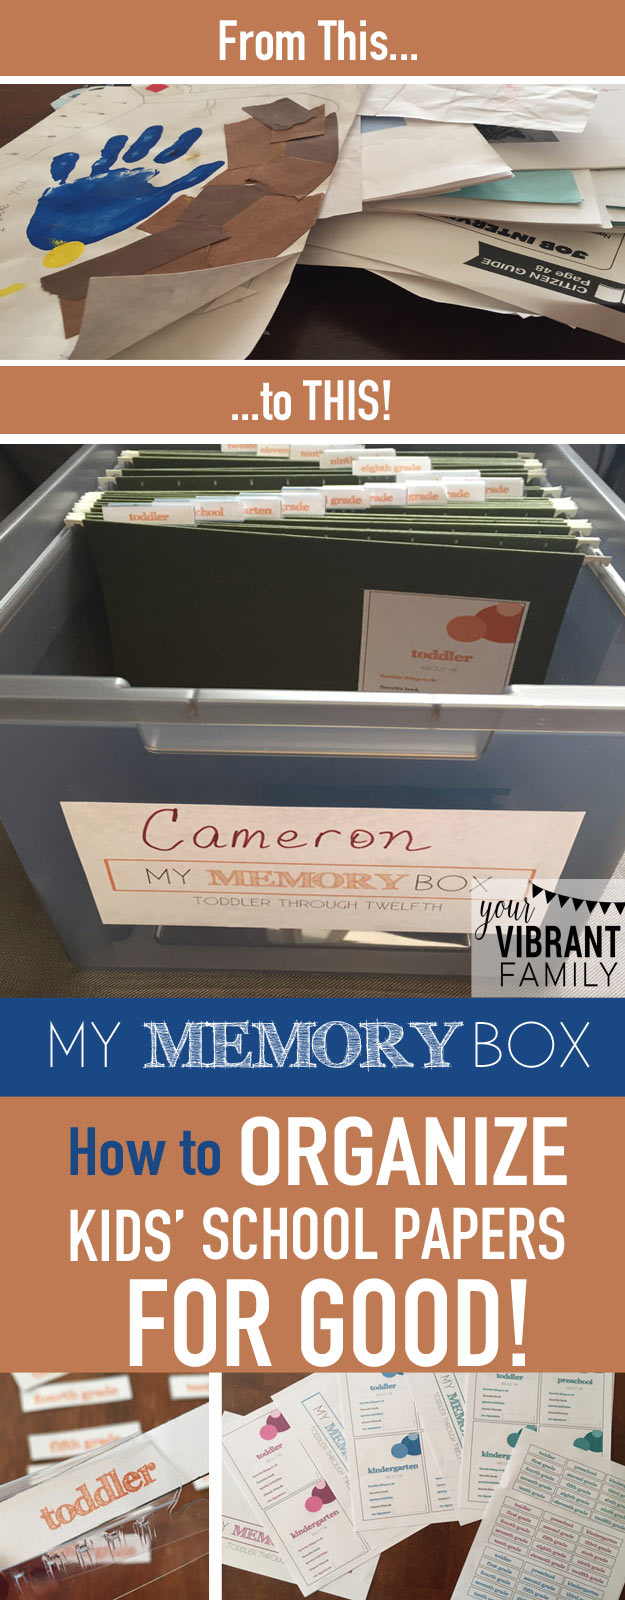 Oh my gosh... YES! Finally a great way to organize kids school papers once and for all-- from their toddler years through twelfth grade! What a great keepsake to pass on to your kids too! You'll be doing a happy dance after reading this!